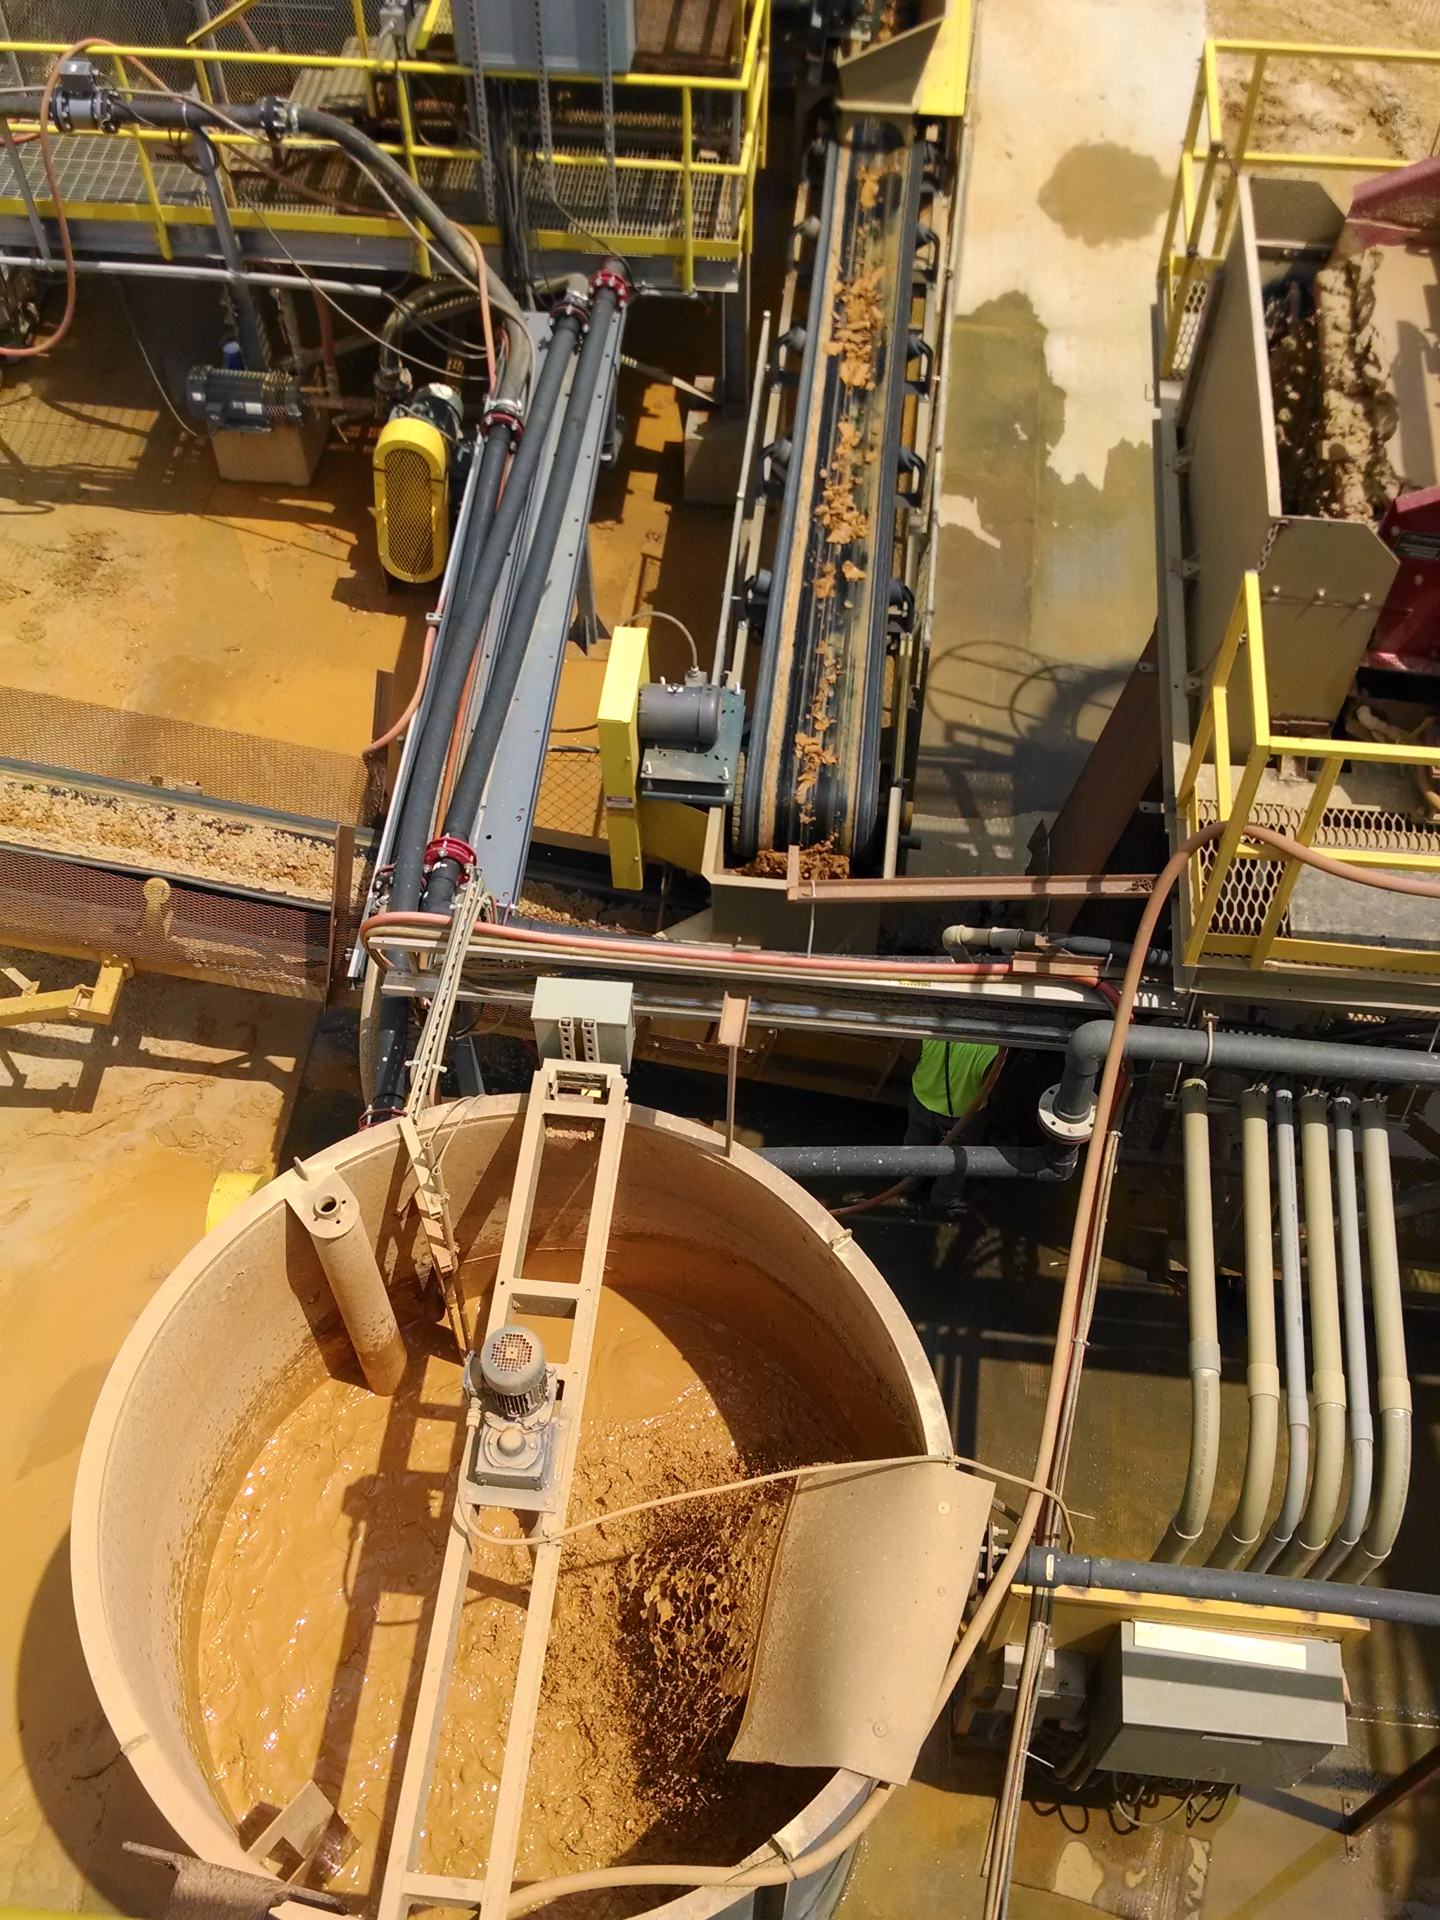 An above view of a section of a sand washing plant with conveyor belts taking aggregates to different locations.